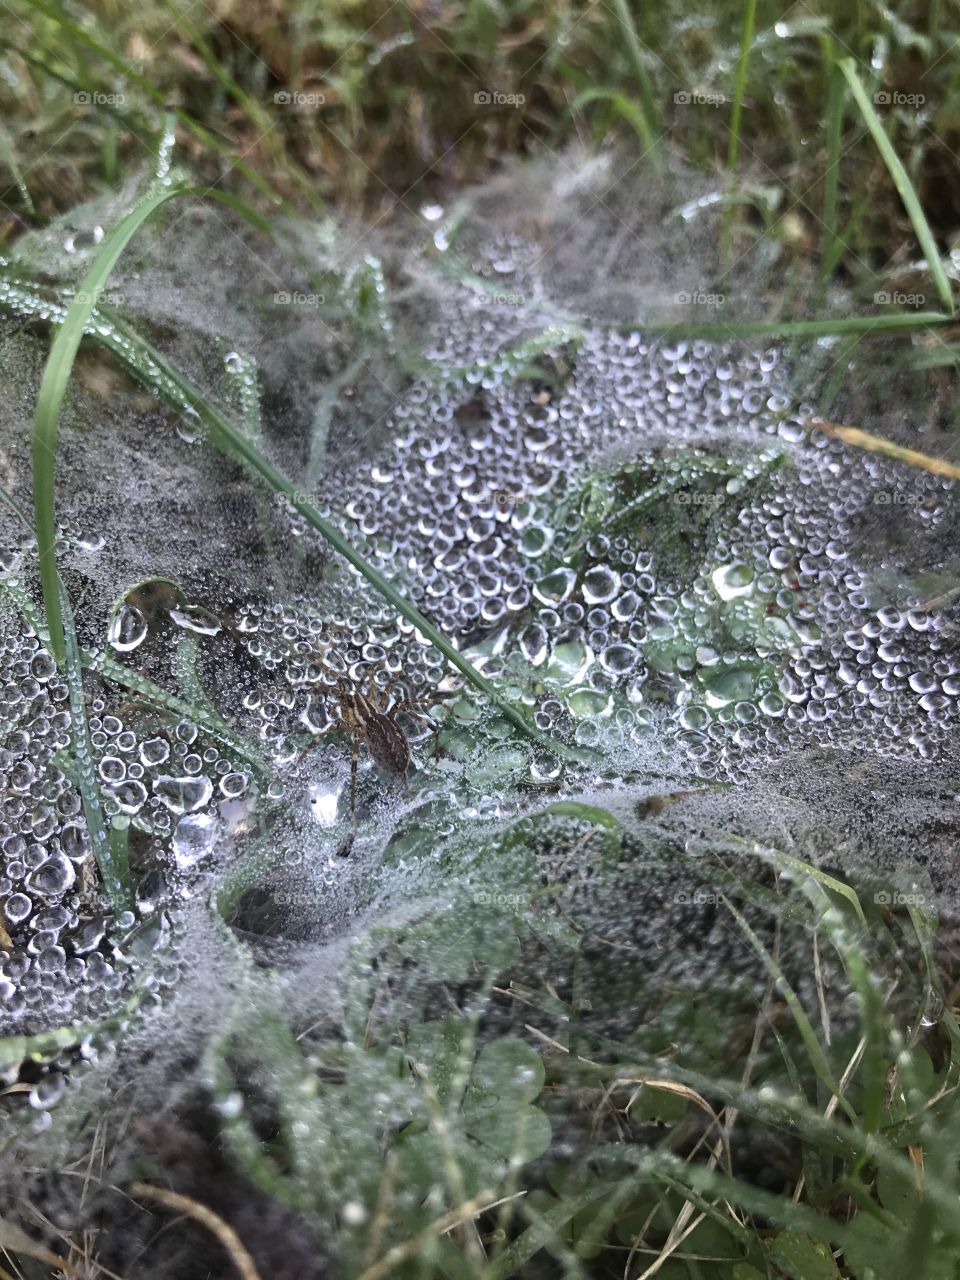 A small spider guards his dew covered web